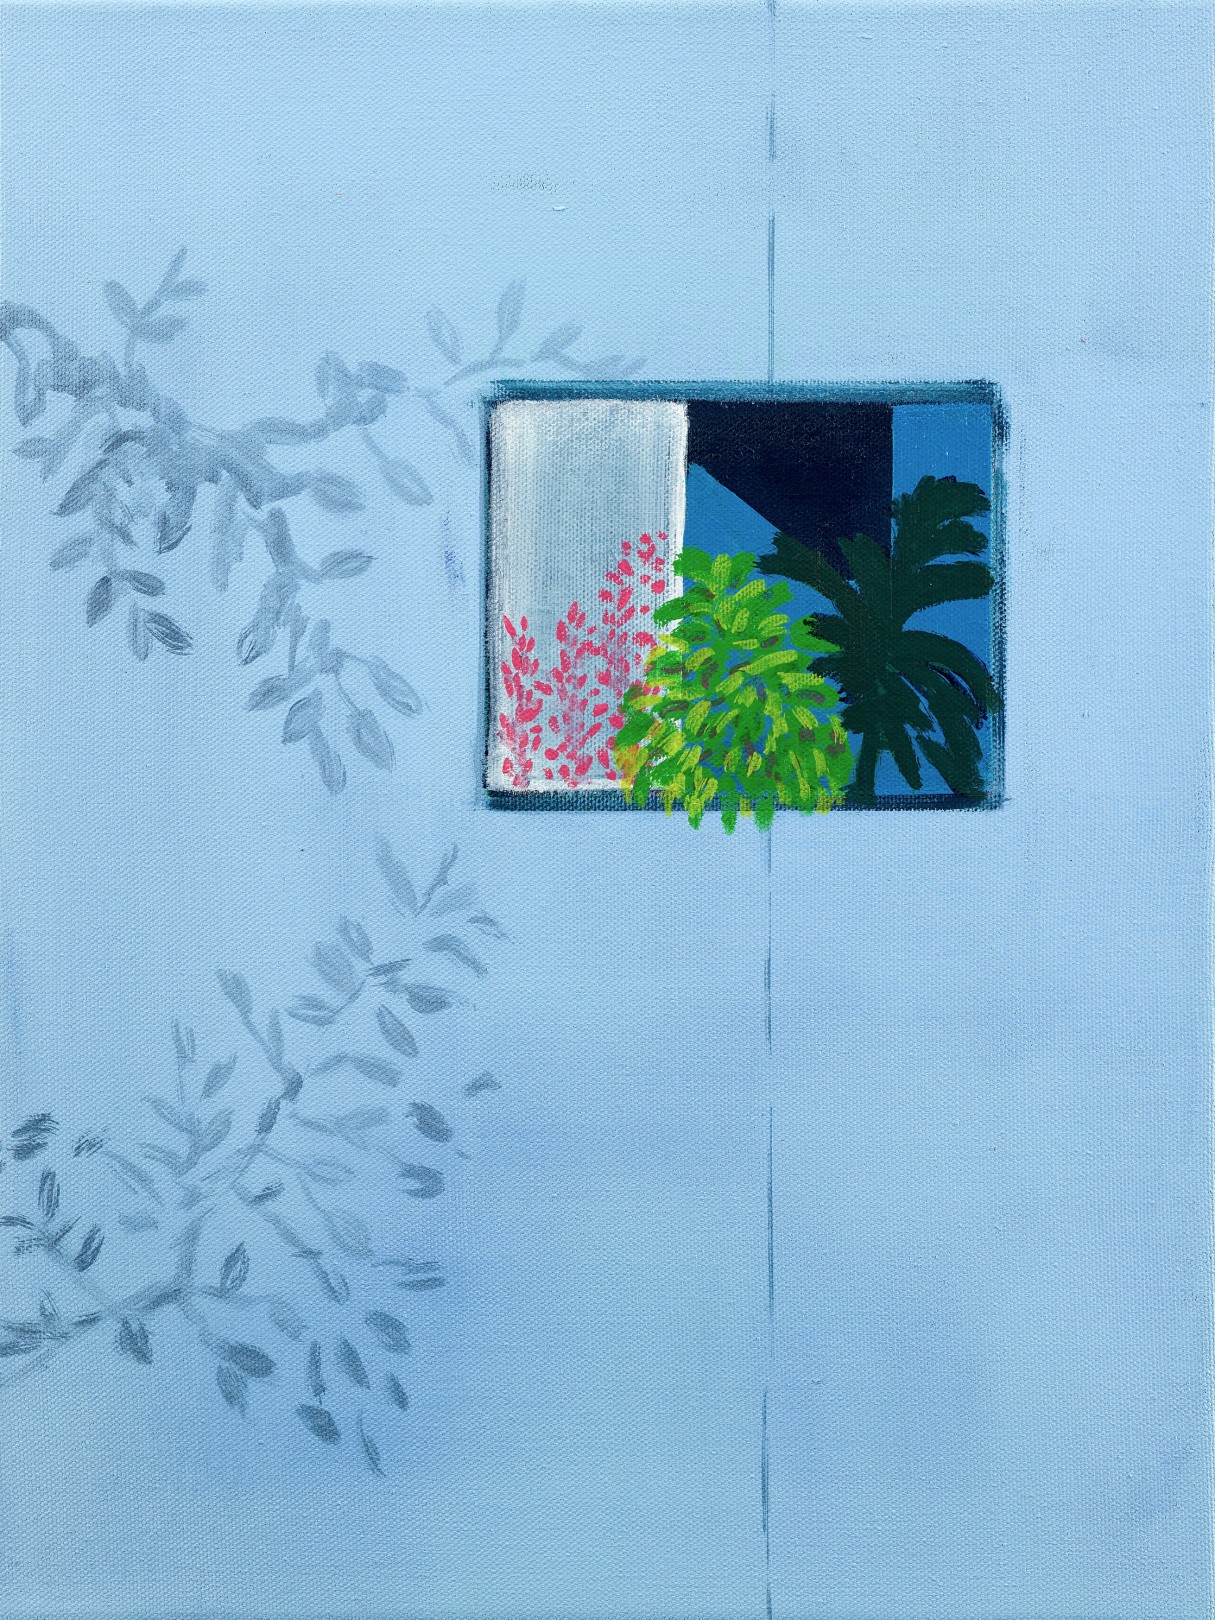 Cara Nahaul Imagined Window 2, 2020 Oil on canvas 40 x 30 cm. / 16 x 12 in. Courtesy of the artist and Taymour Grahne Projects. Photo: Peter Mallet